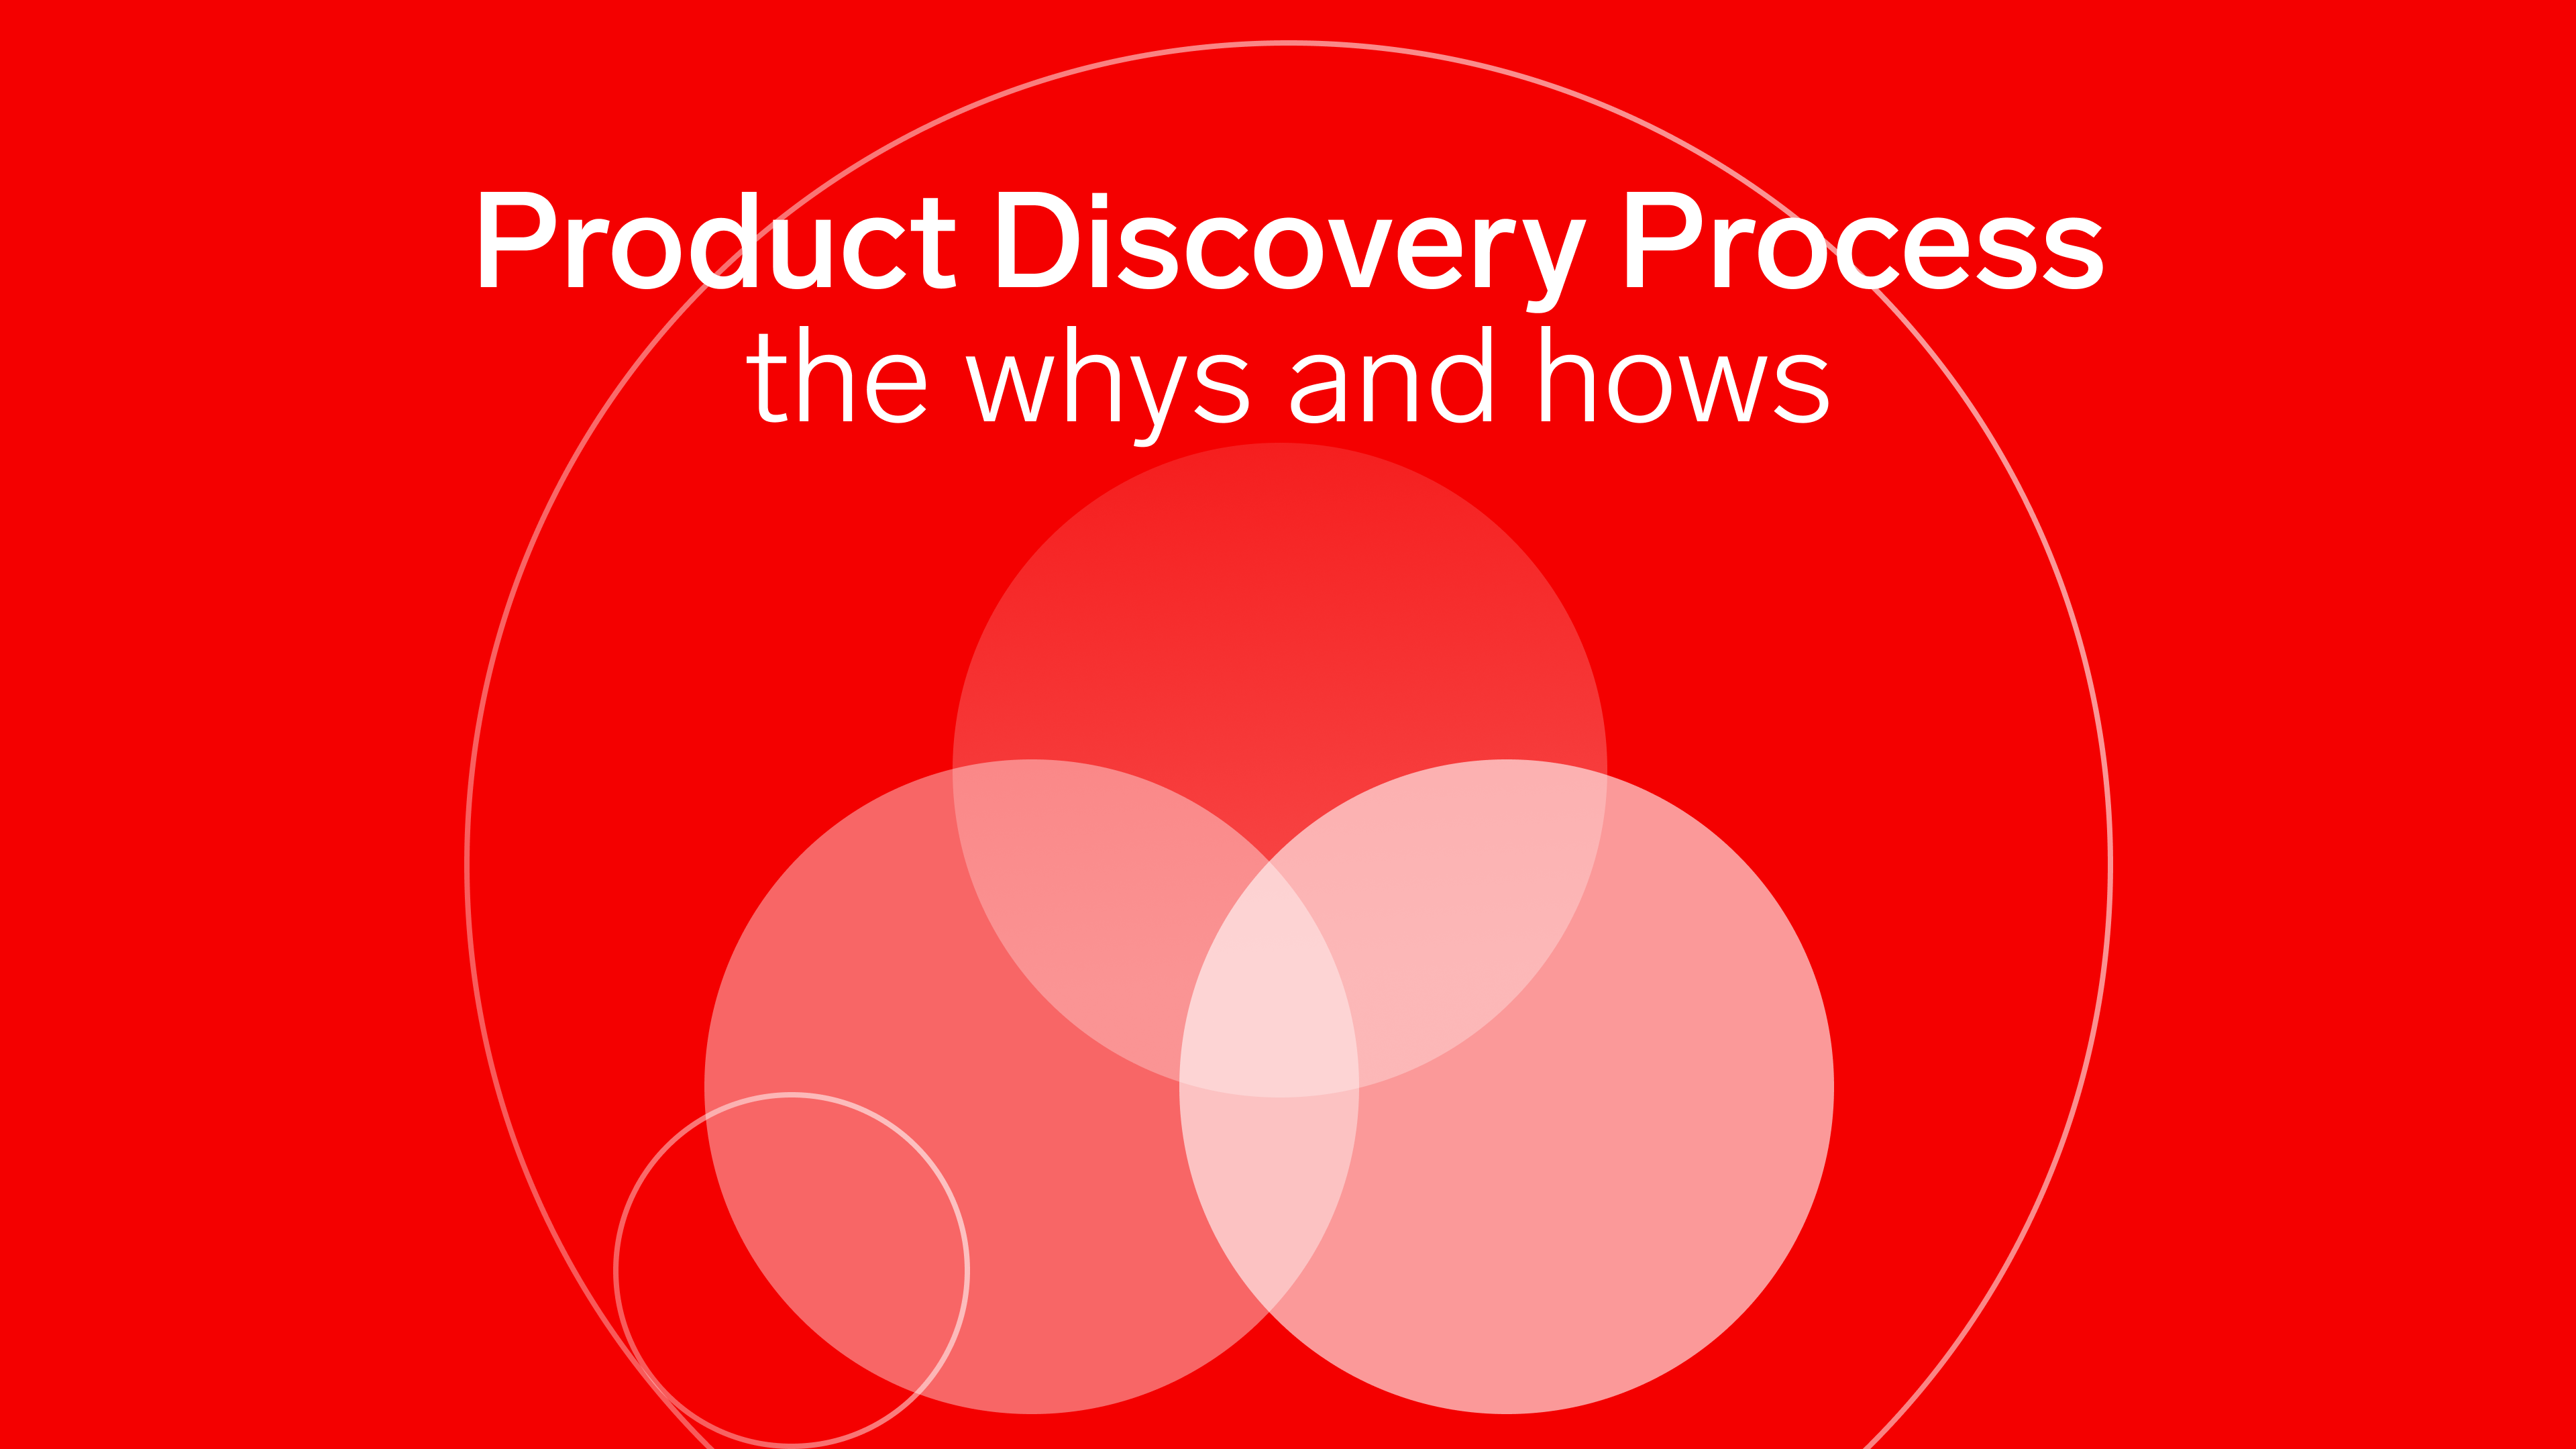 Product discovery minimizes costly mistakes for startups 